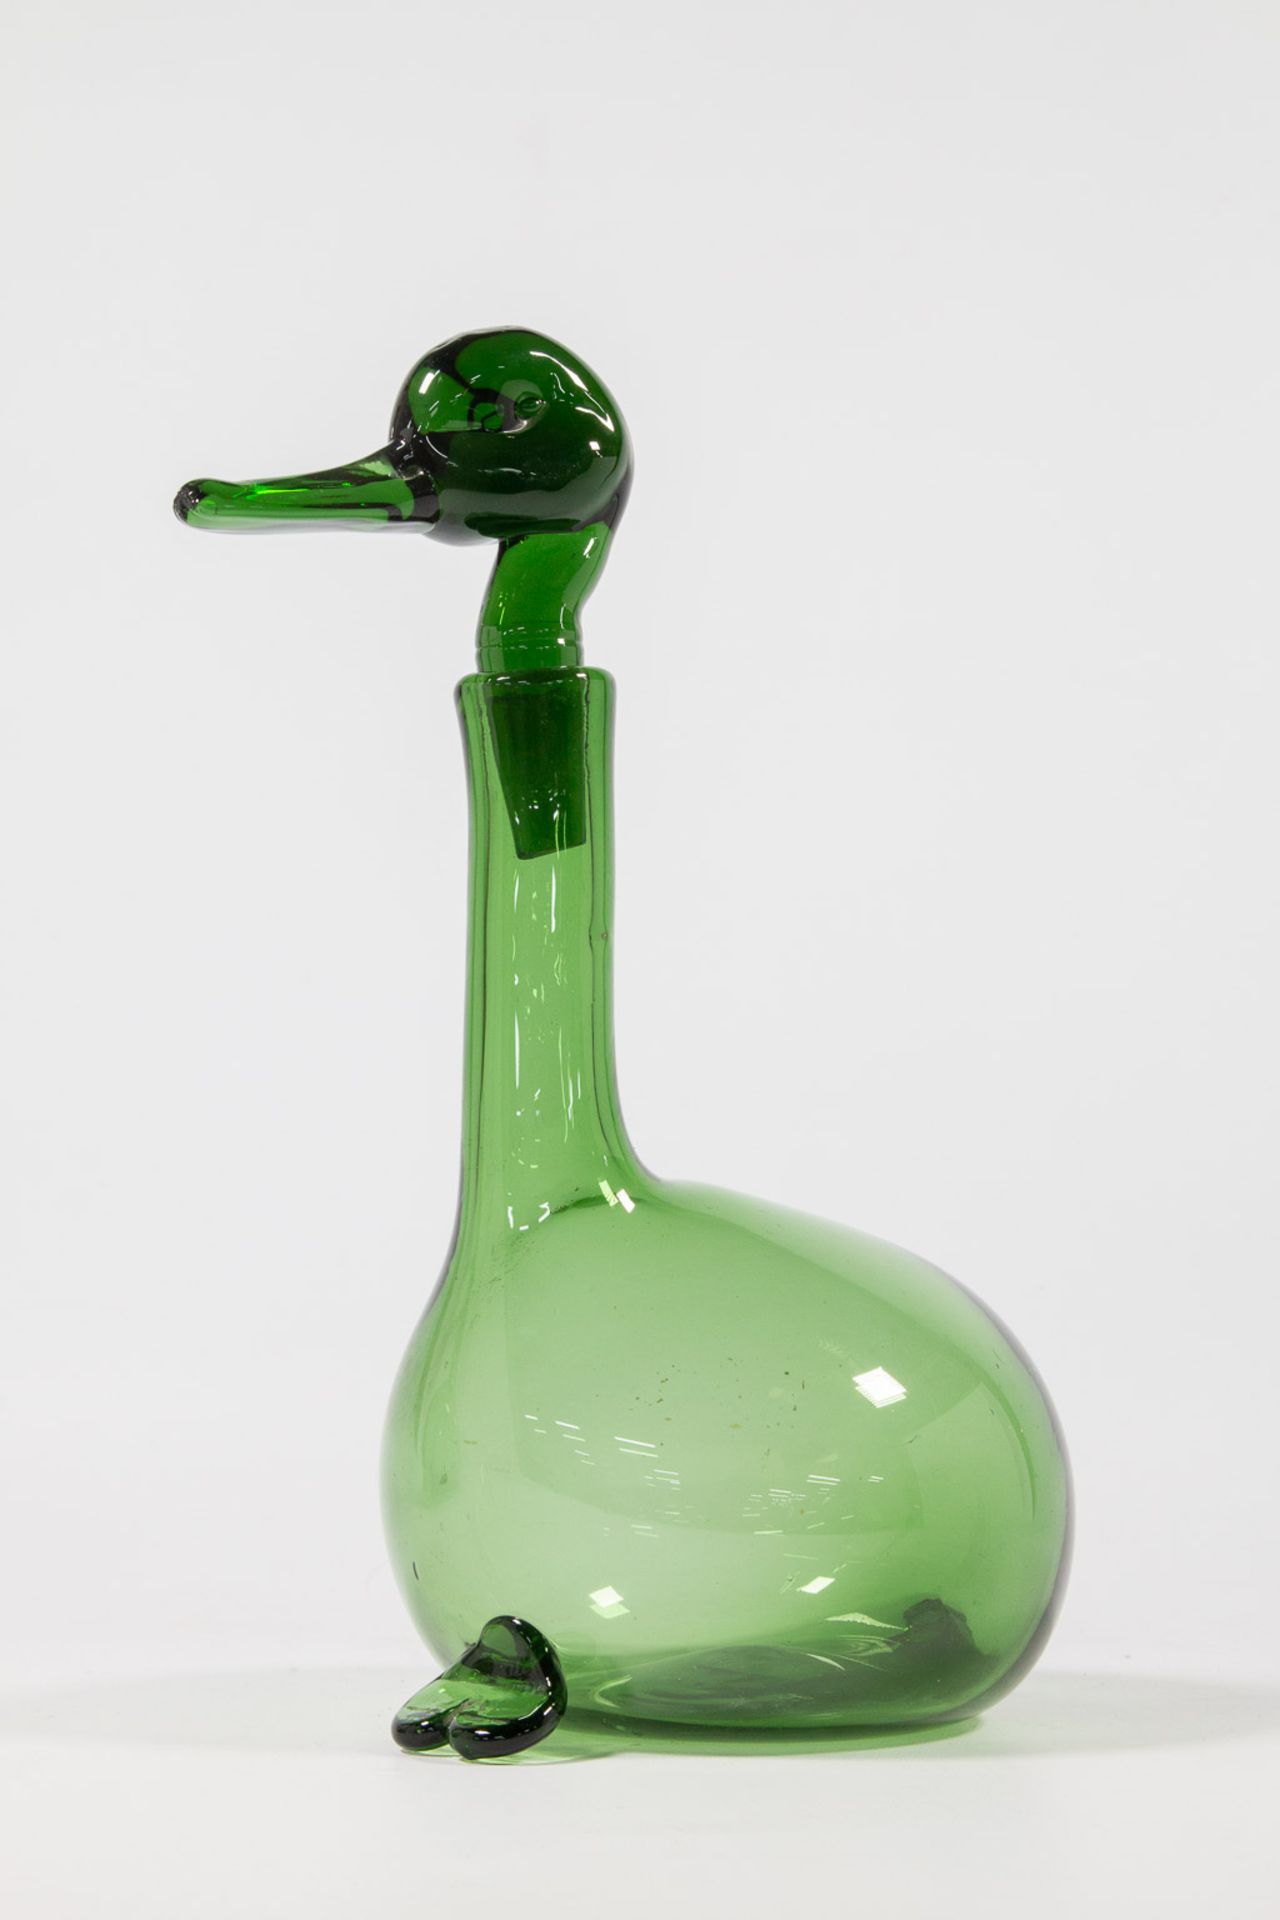 An Empoli Glass Rooster and Duck Decanter - Image 7 of 15